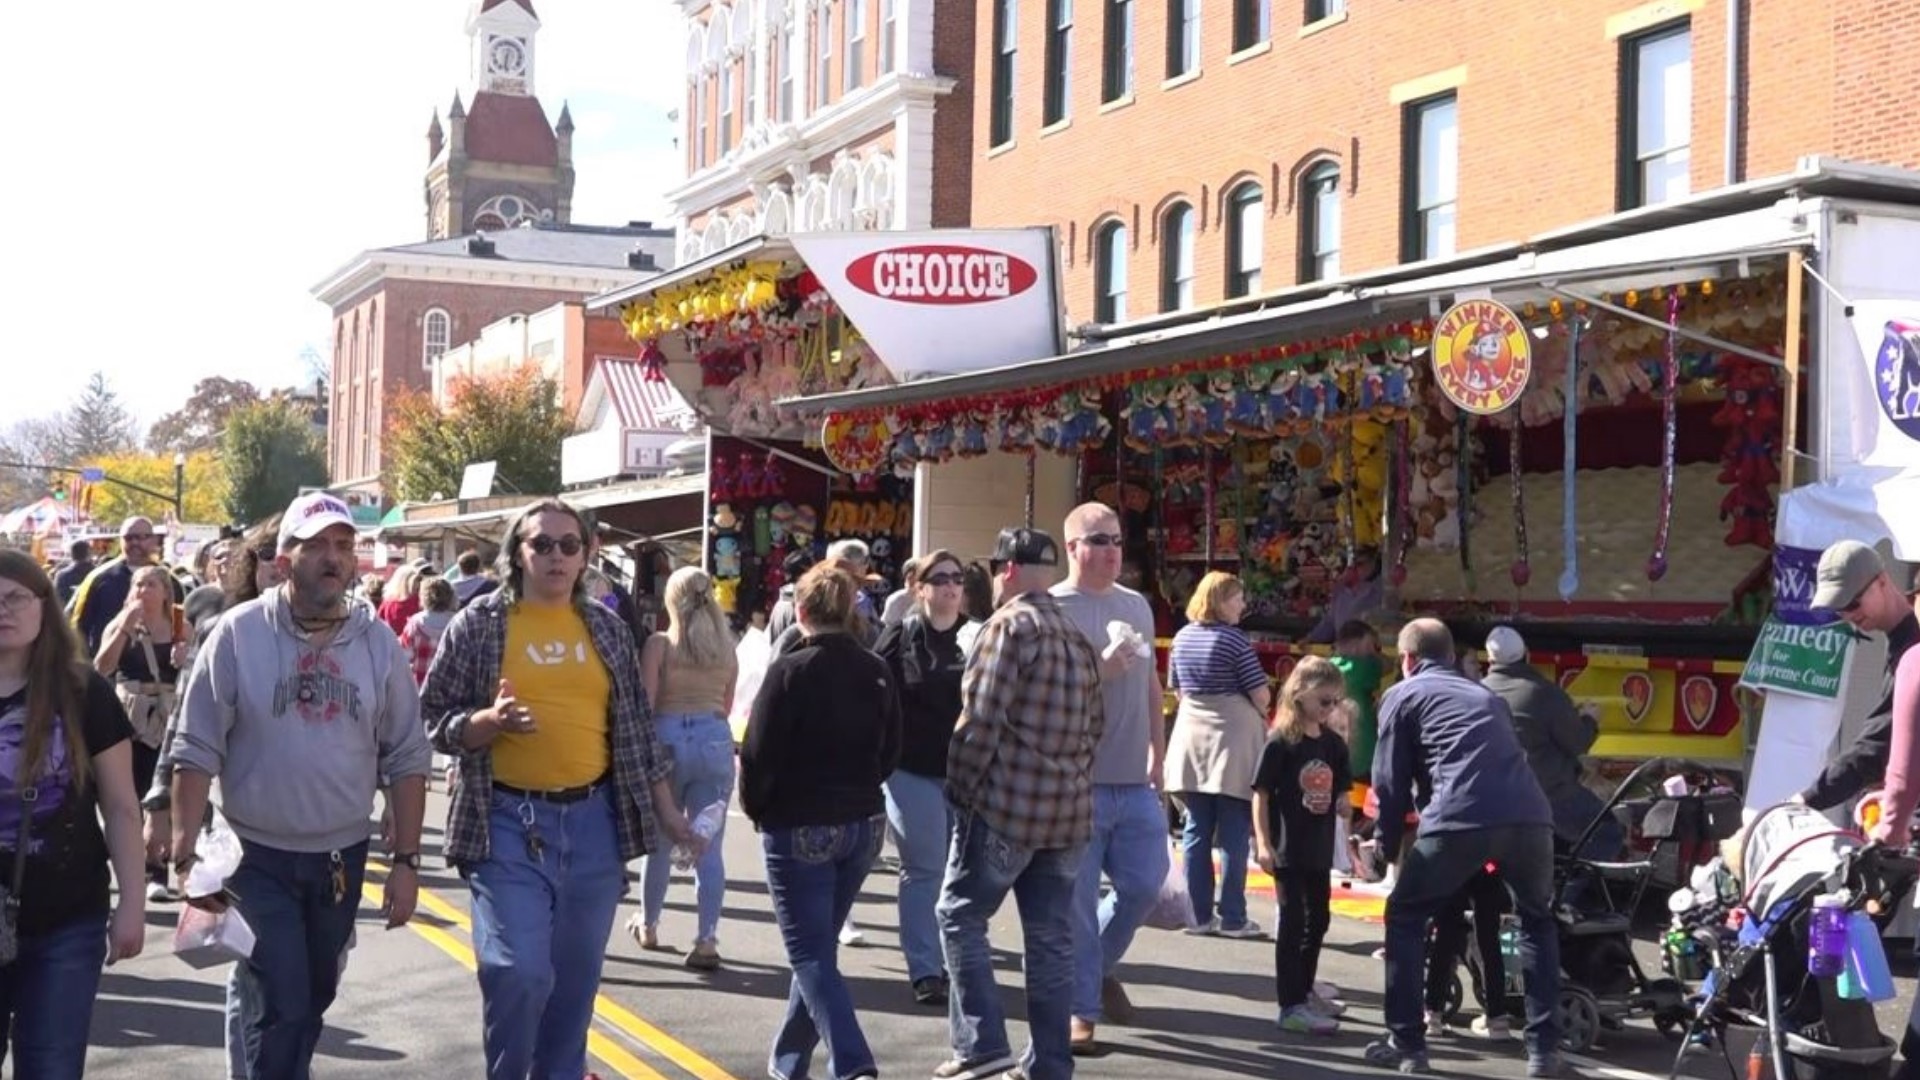 Business owners in Circleville were pleased with the large crowds and upswing in business this year.